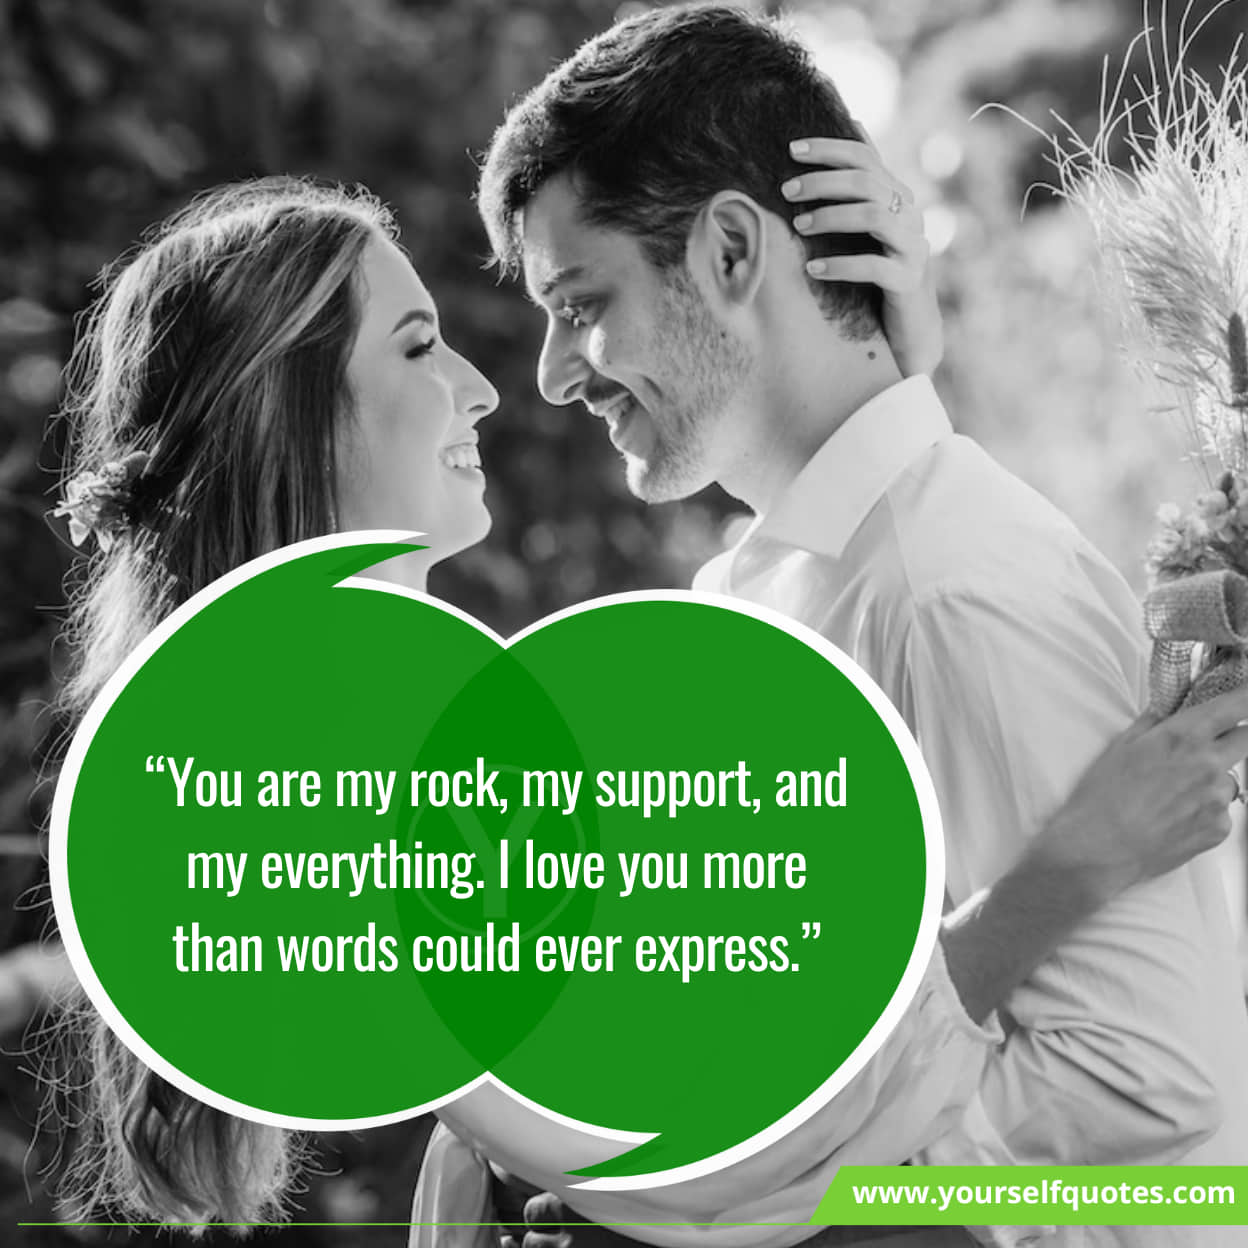 Love quotes for long-distance relationships